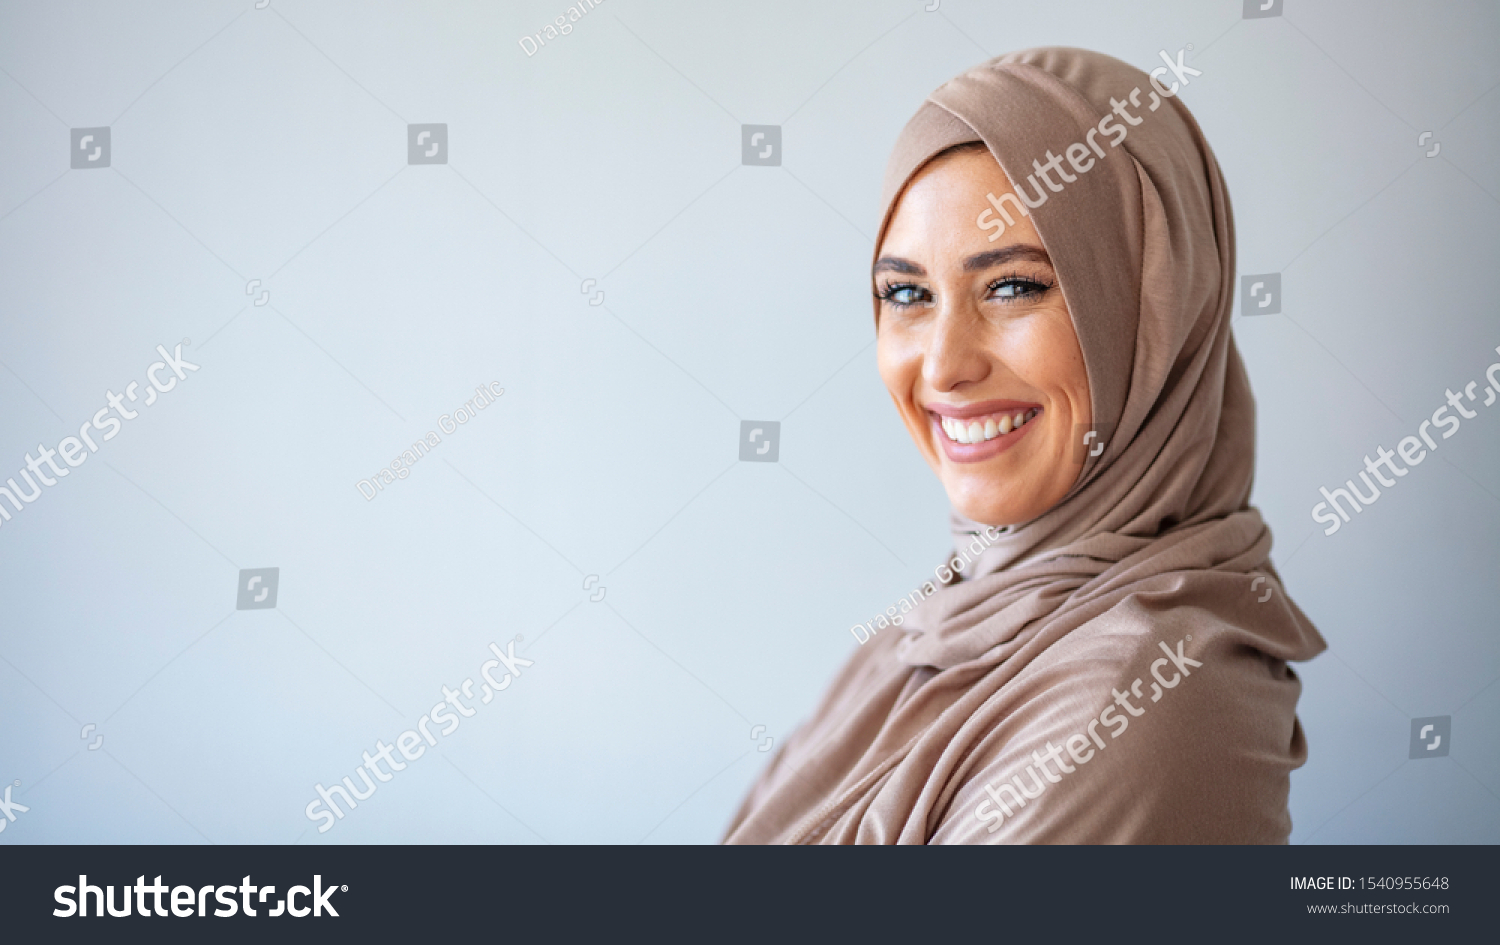 Young asian muslim woman in head scarf smile. Beautiful middle eastern woman wearing abaya. Arabian woman with happy smile. Strict formal outfit and elegant appearance. Islamic fashion. #1540955648